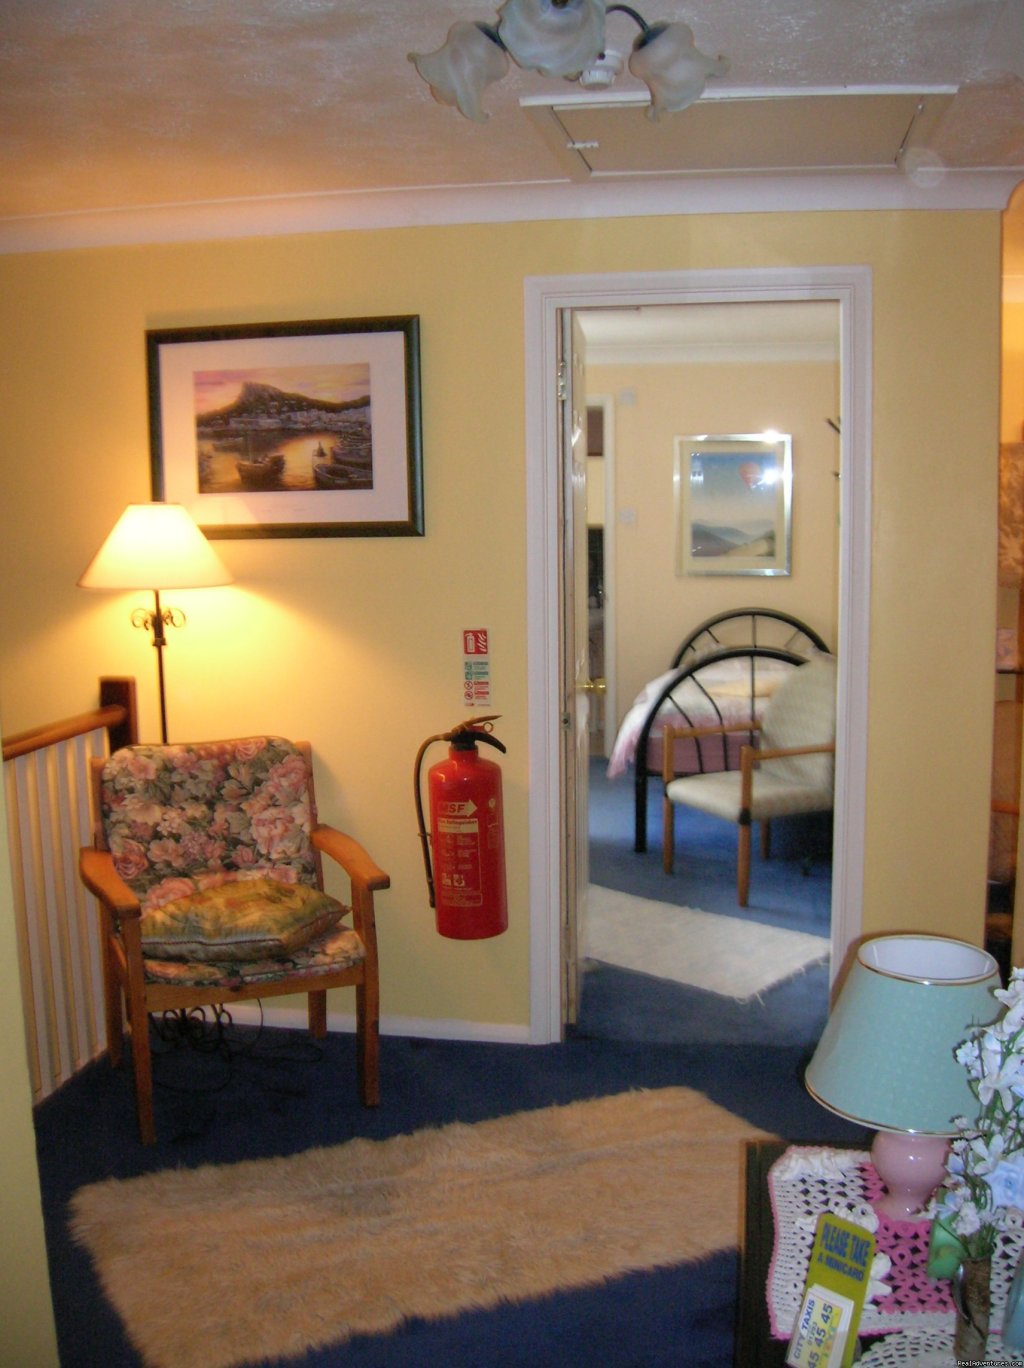 Double or Twin Room. Sleeps upto 3 peopl | Beautiful Guest house / b&b near Gatwick airport | Image #5/7 | 